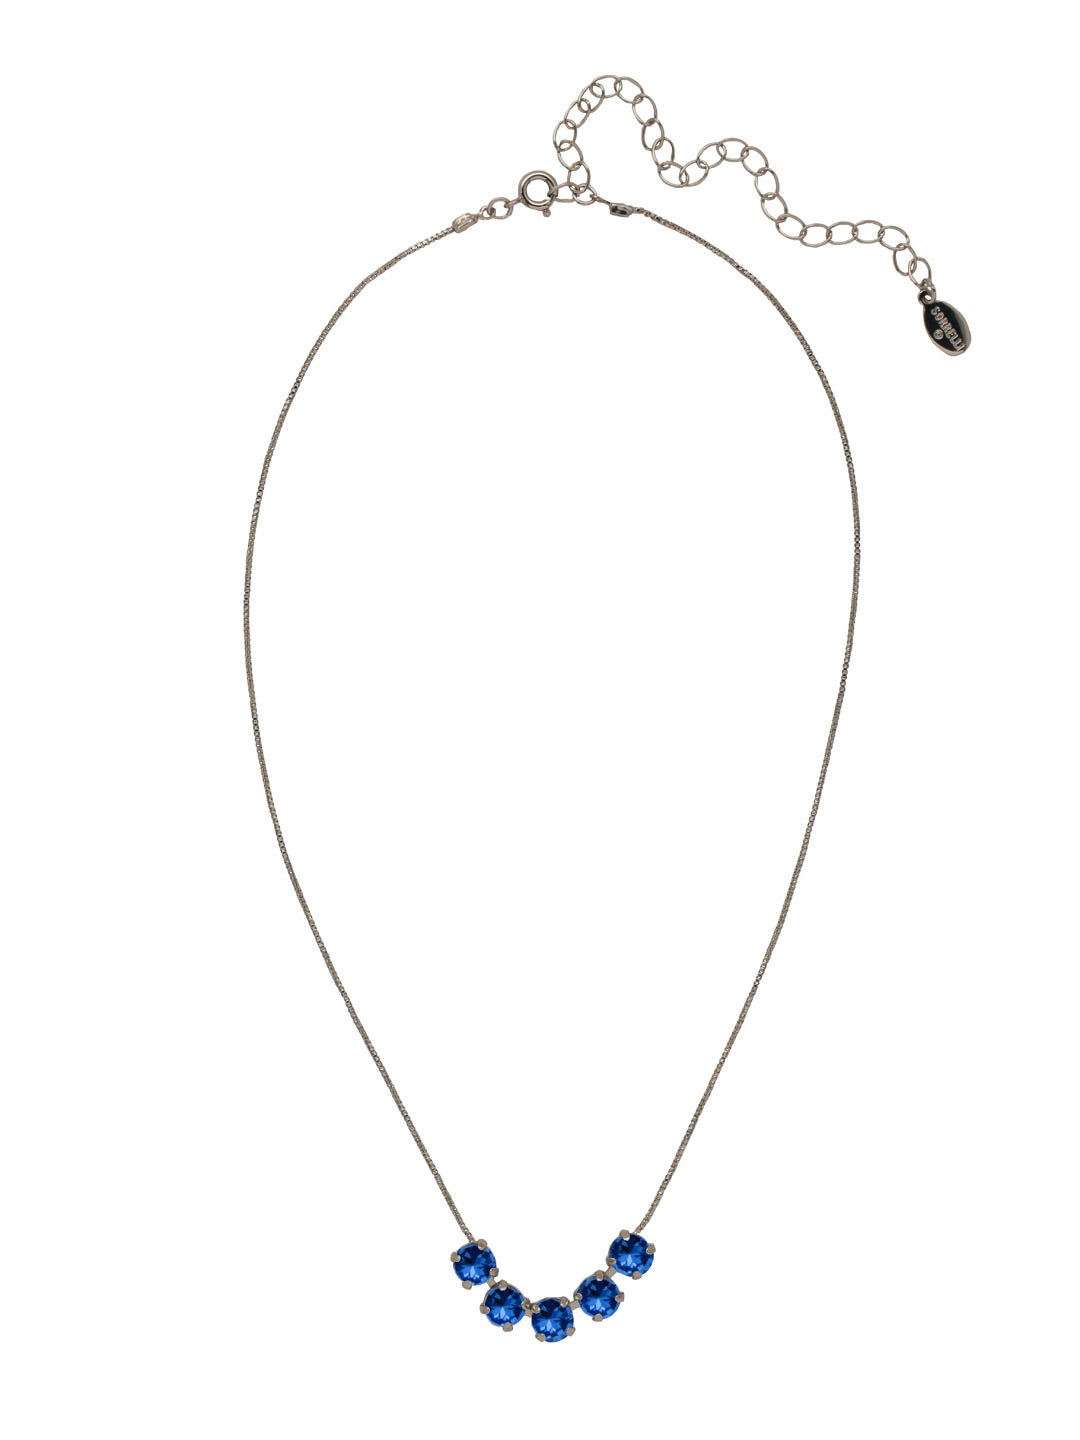 Shaughna Tennis Necklace - NFC84ASSAP - <p>The Shaughna Tennis Necklace features five crystals on a delicate adjustable chain. From Sorrelli's Sapphire collection in our Antique Silver-tone finish.</p>